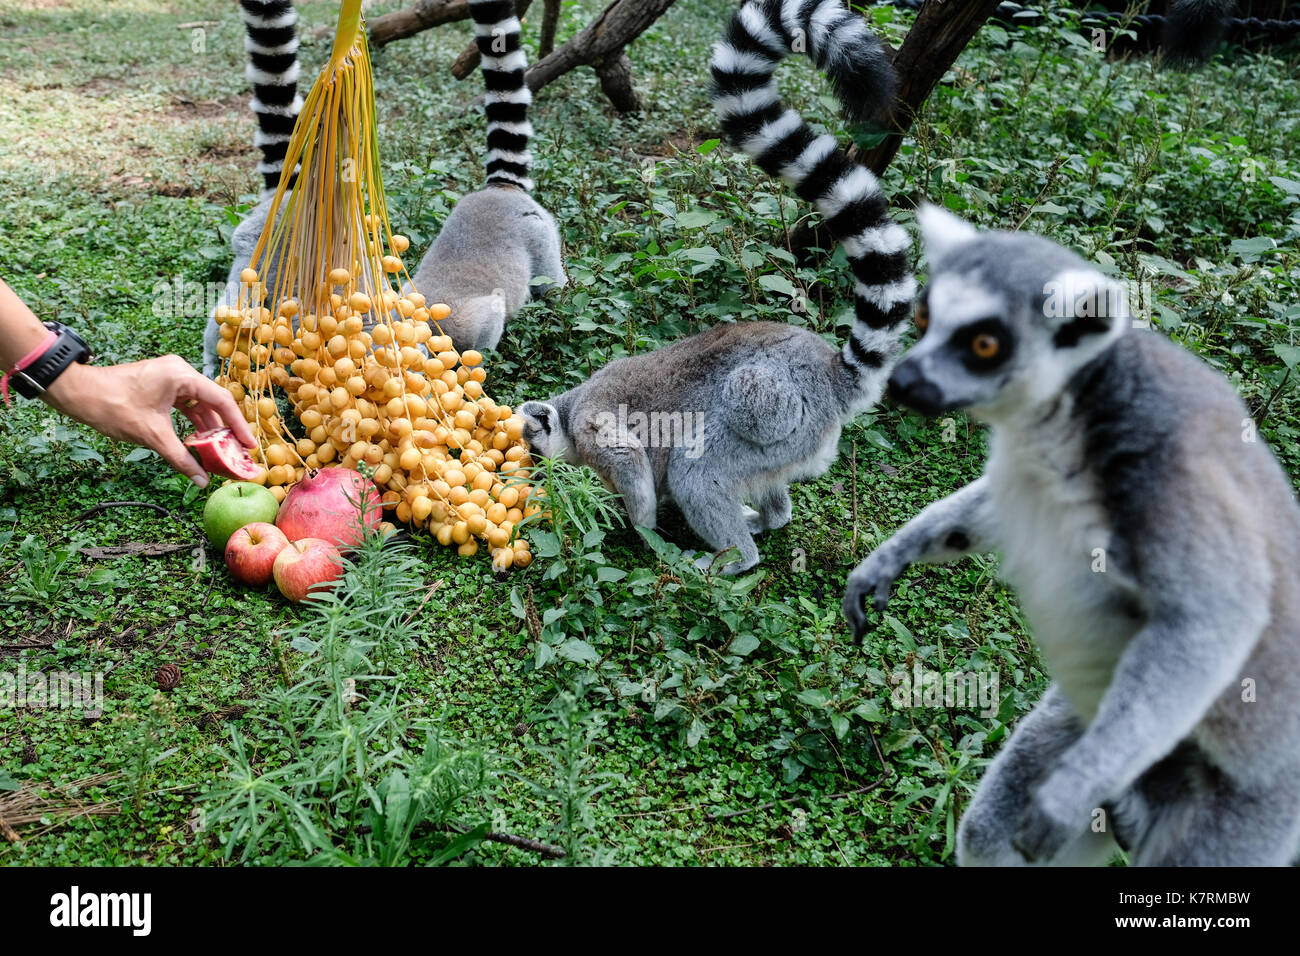 Ramat Gan, Israel. 17th September, 2017. Animal handlers symbolically treat Ring Tailed Lemurs to apples, pomegranates and dates at the Safari Zoological Center on the eve of Rosh Hashanah, the Jewish New Year, an occasion on which Jews all over the world will traditionally eat these fruits in hope of a sweet new year. Stock Photo